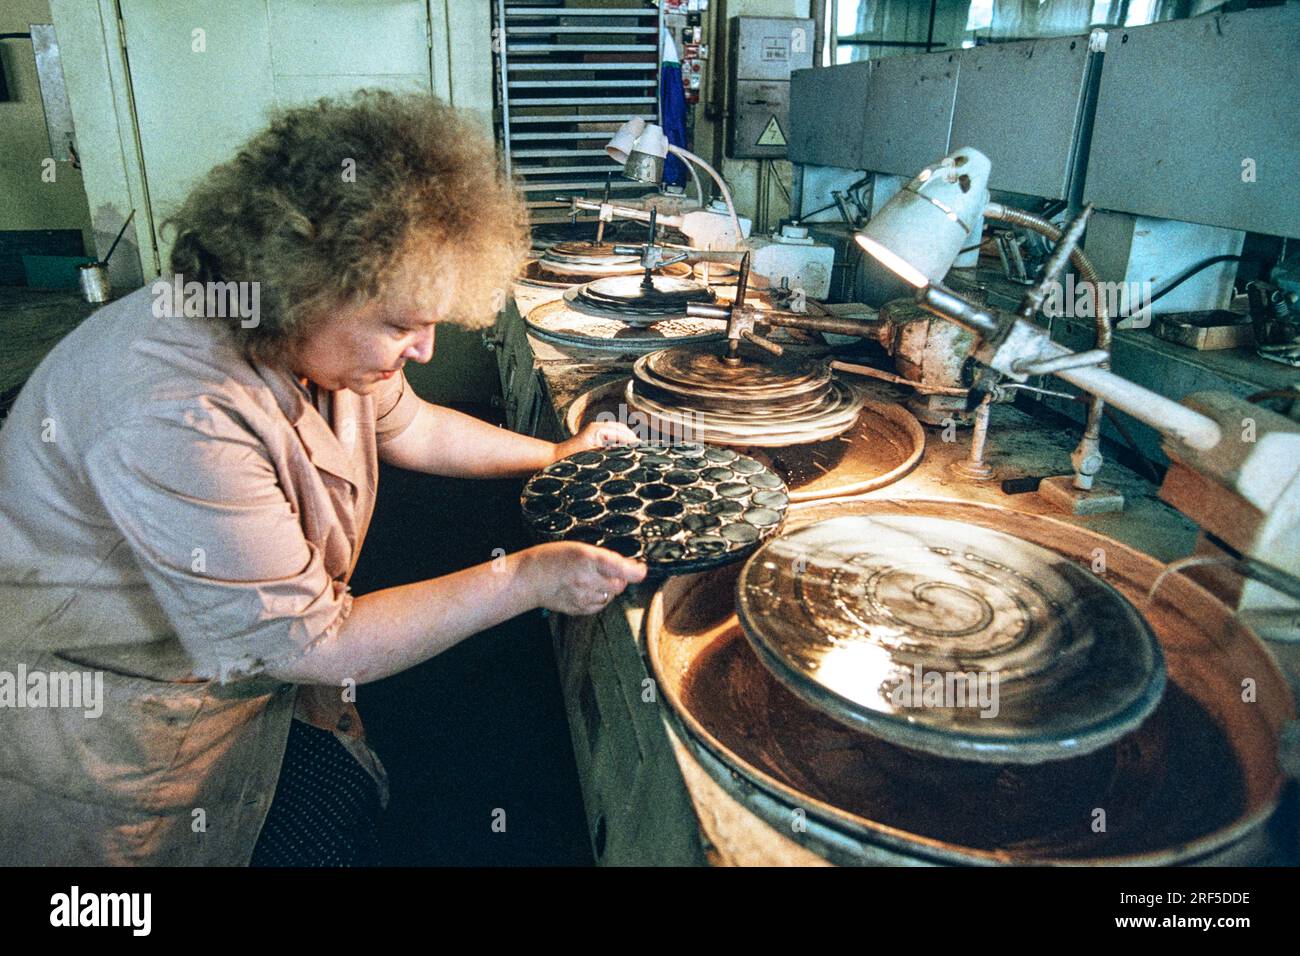 A technician prepares to hand grind optical lenses at the LOMO Optical Factory, December 10, 1994 in St. Petersburg, Russia. The Leningrad Optical Mechanical Association begun production in 1914 under the Soviet Union and was privatized in 1994 specializing in cameras, telescopes, microscopes and endoscopes. Stock Photo